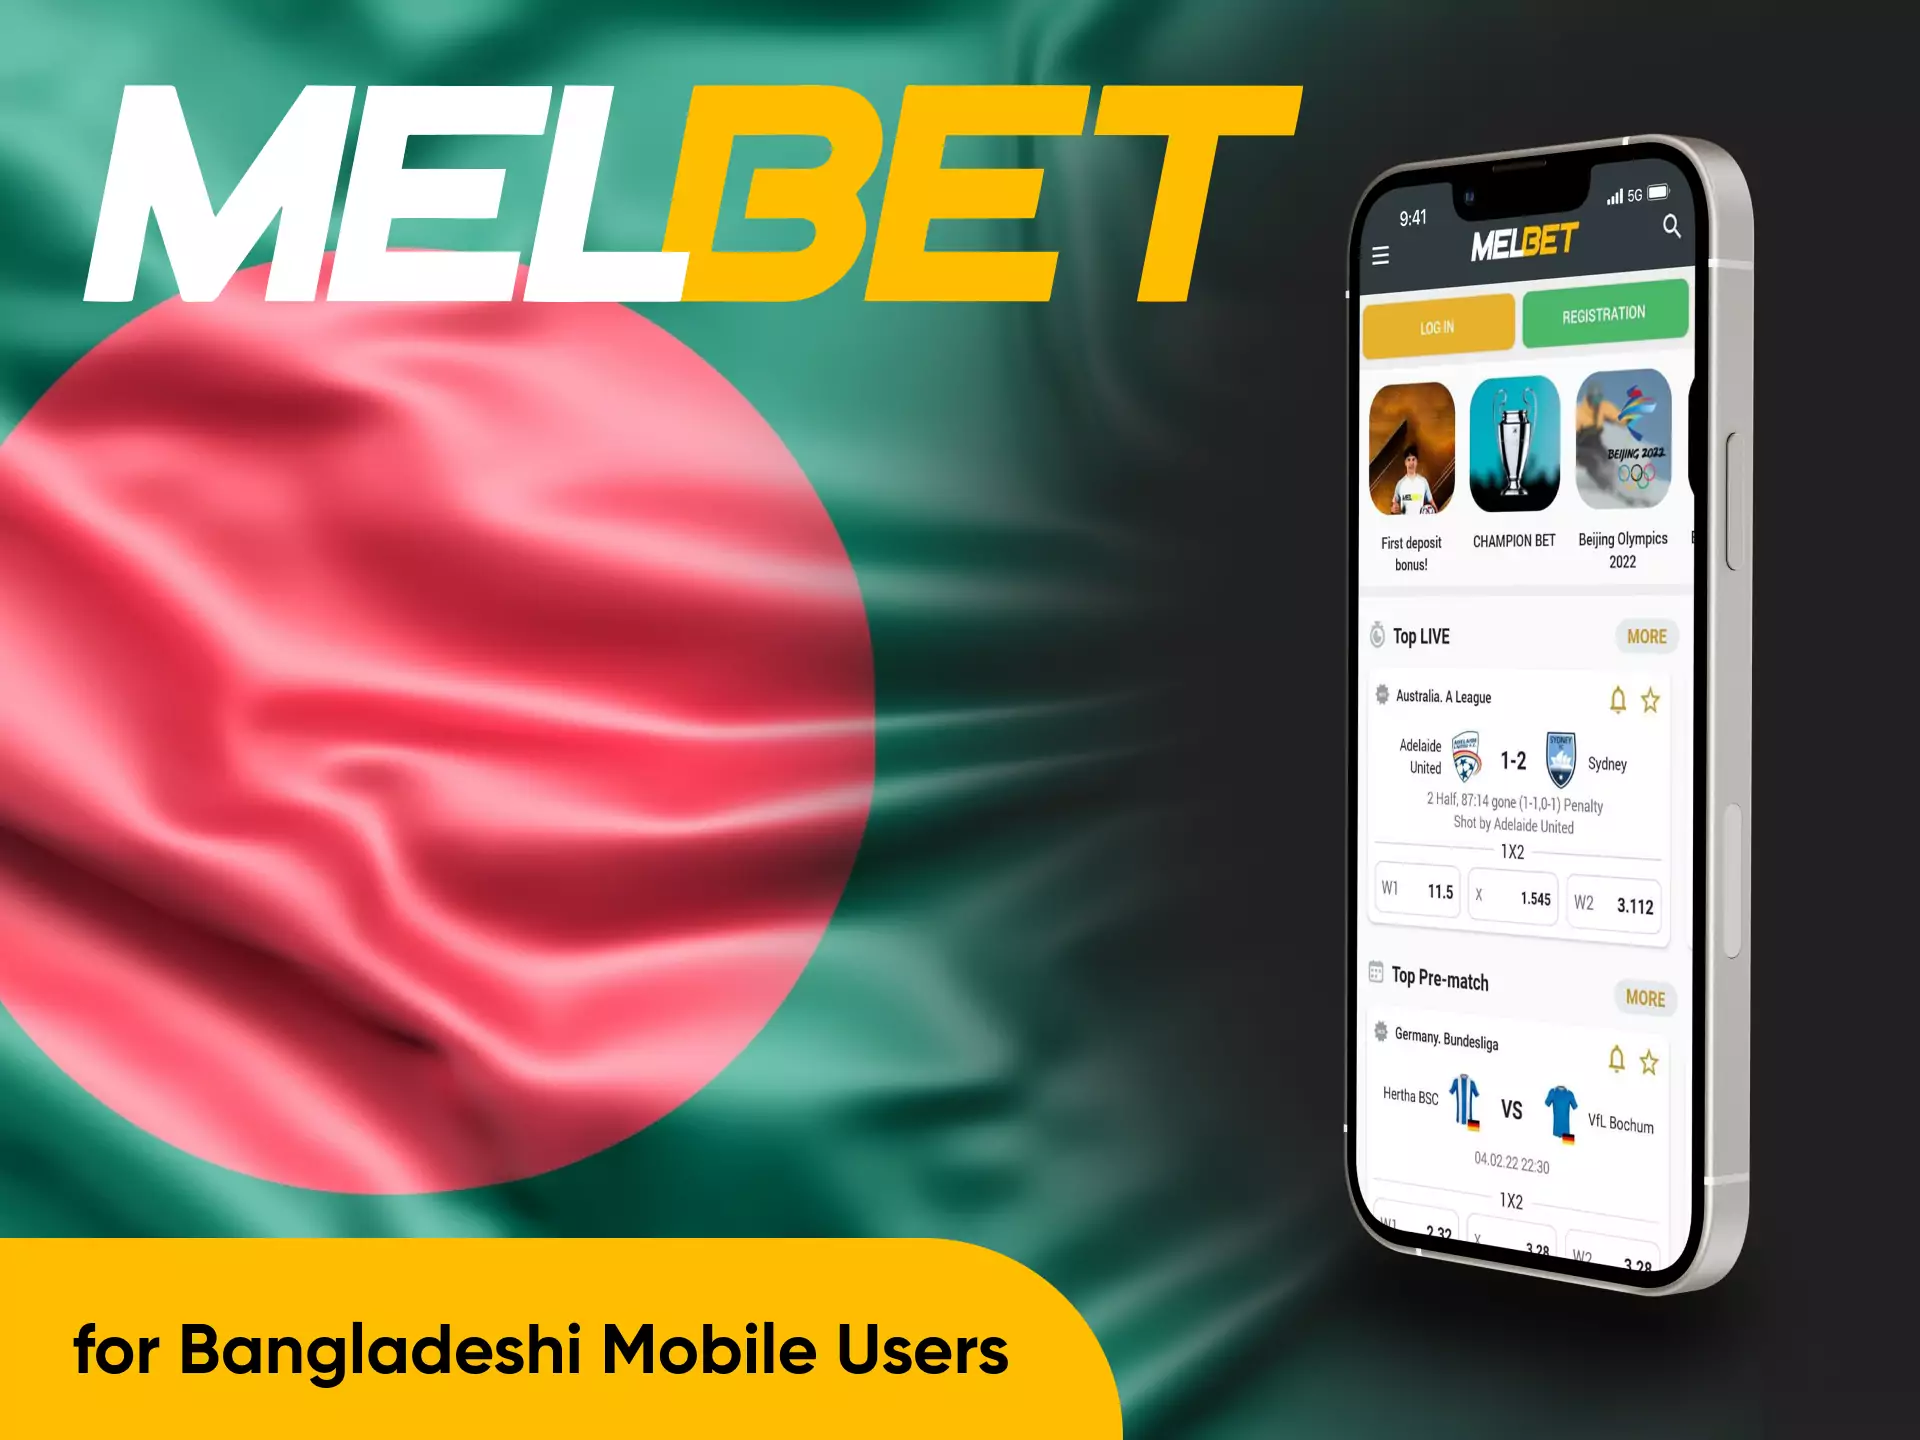 The Melbet app is allowed for users from Bangladesh.